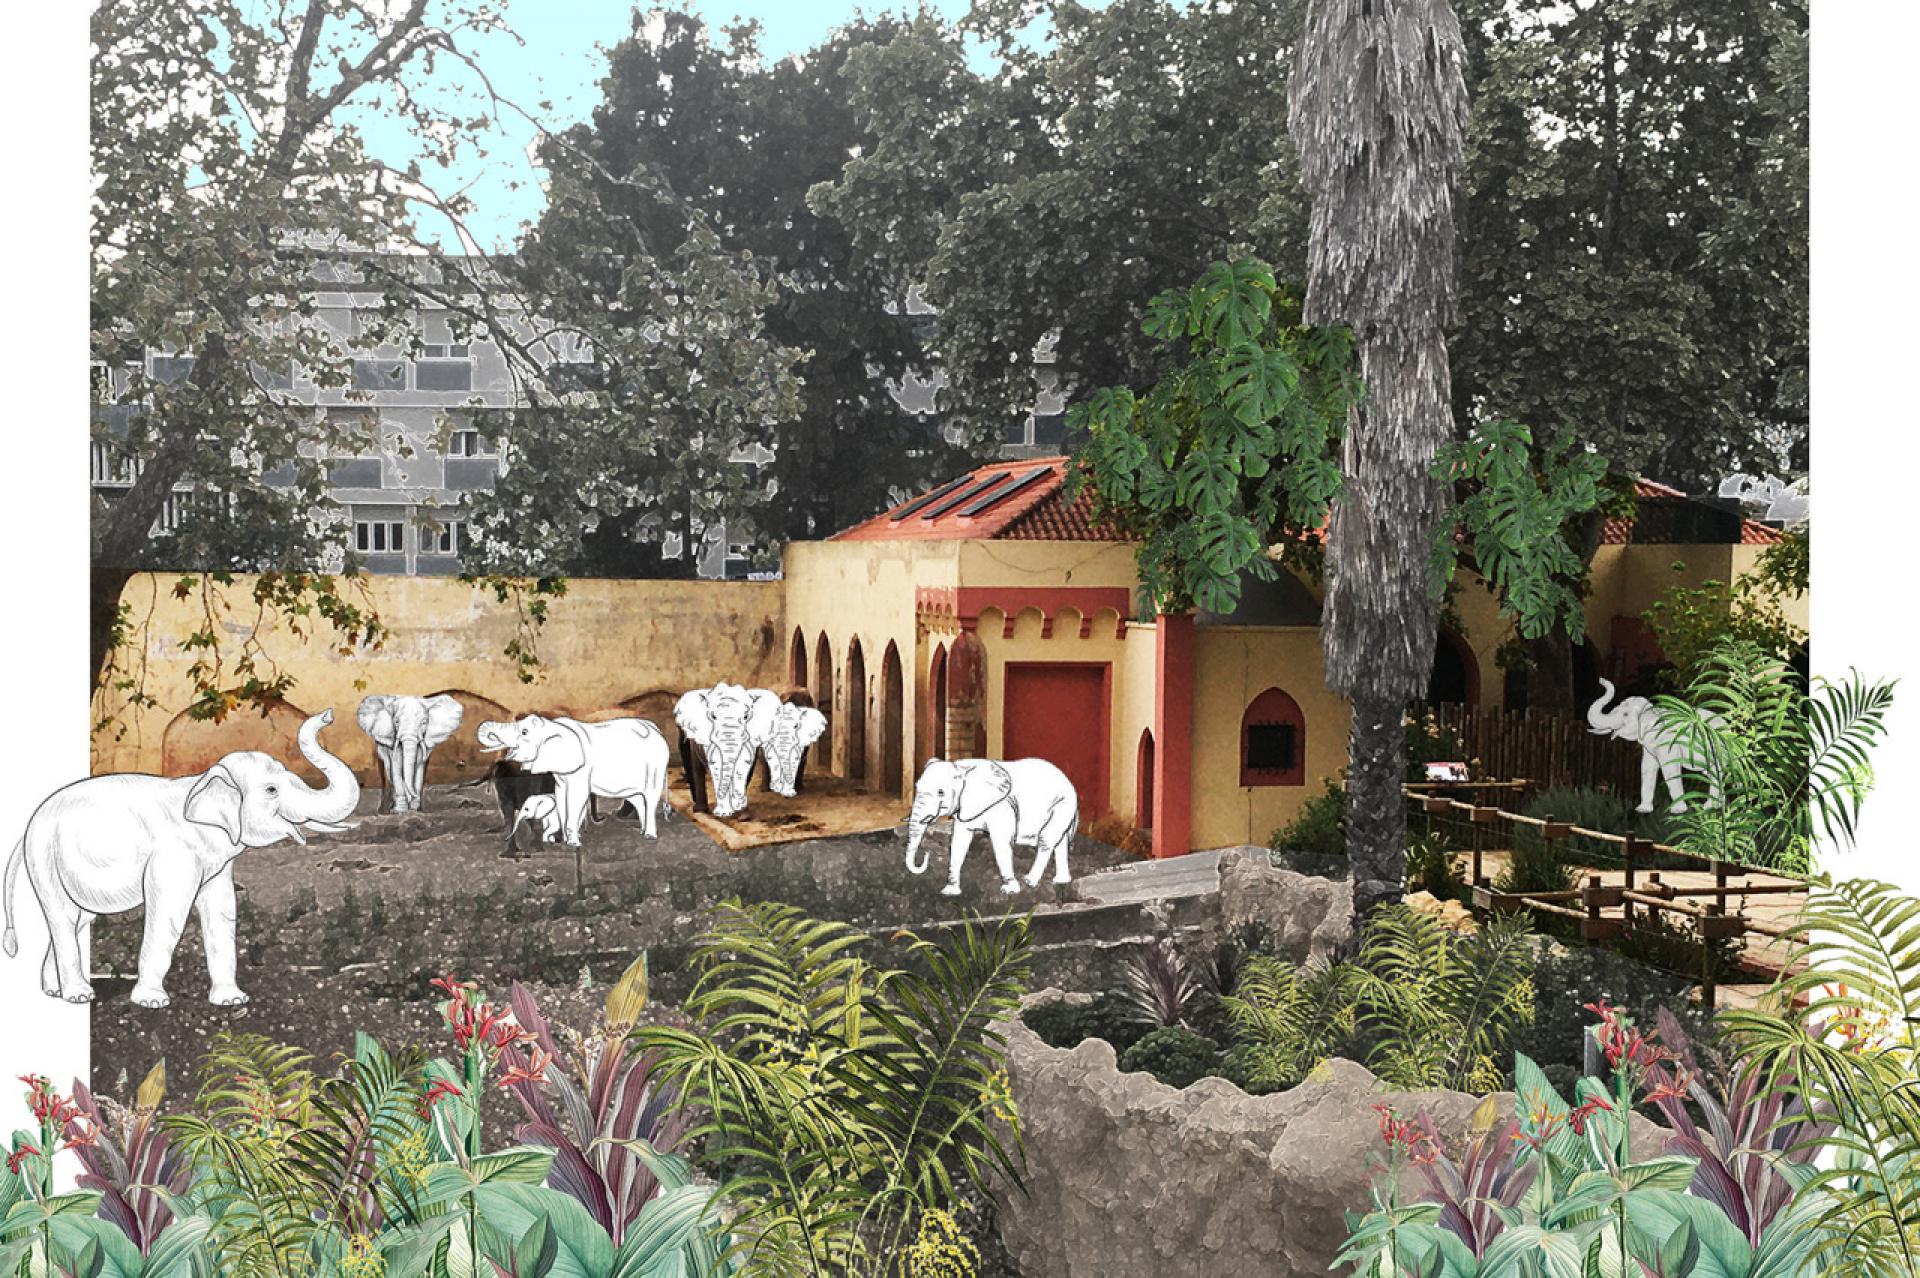 The Elephants’ pavilion | Photo, illustration by the exhibition curatorial team